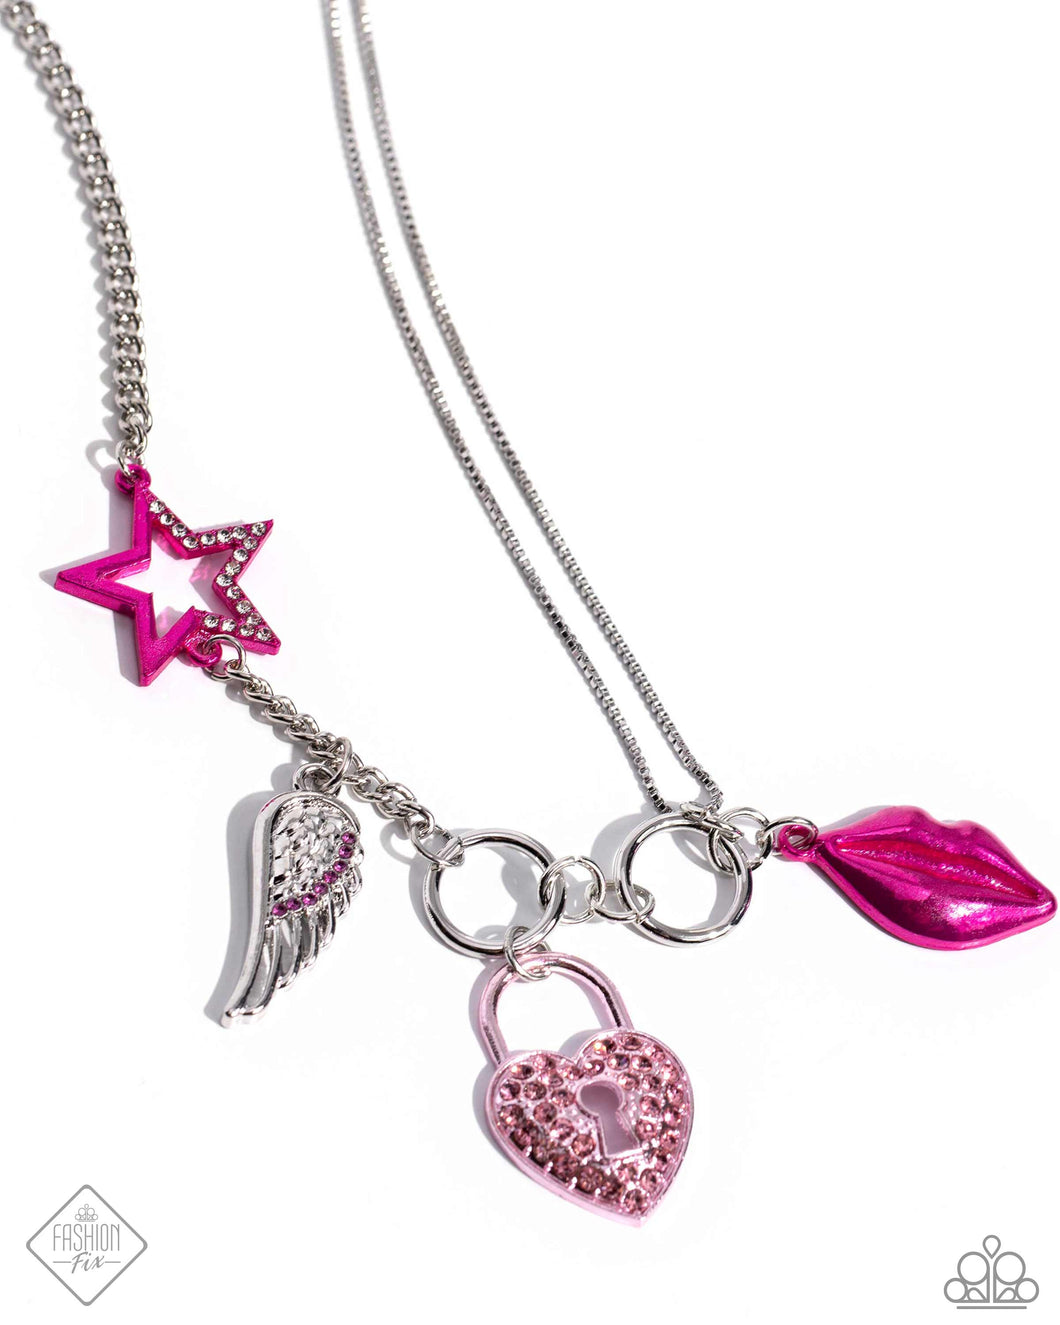 Paparazzi Accessories - The Princess and the Popstar - Pink